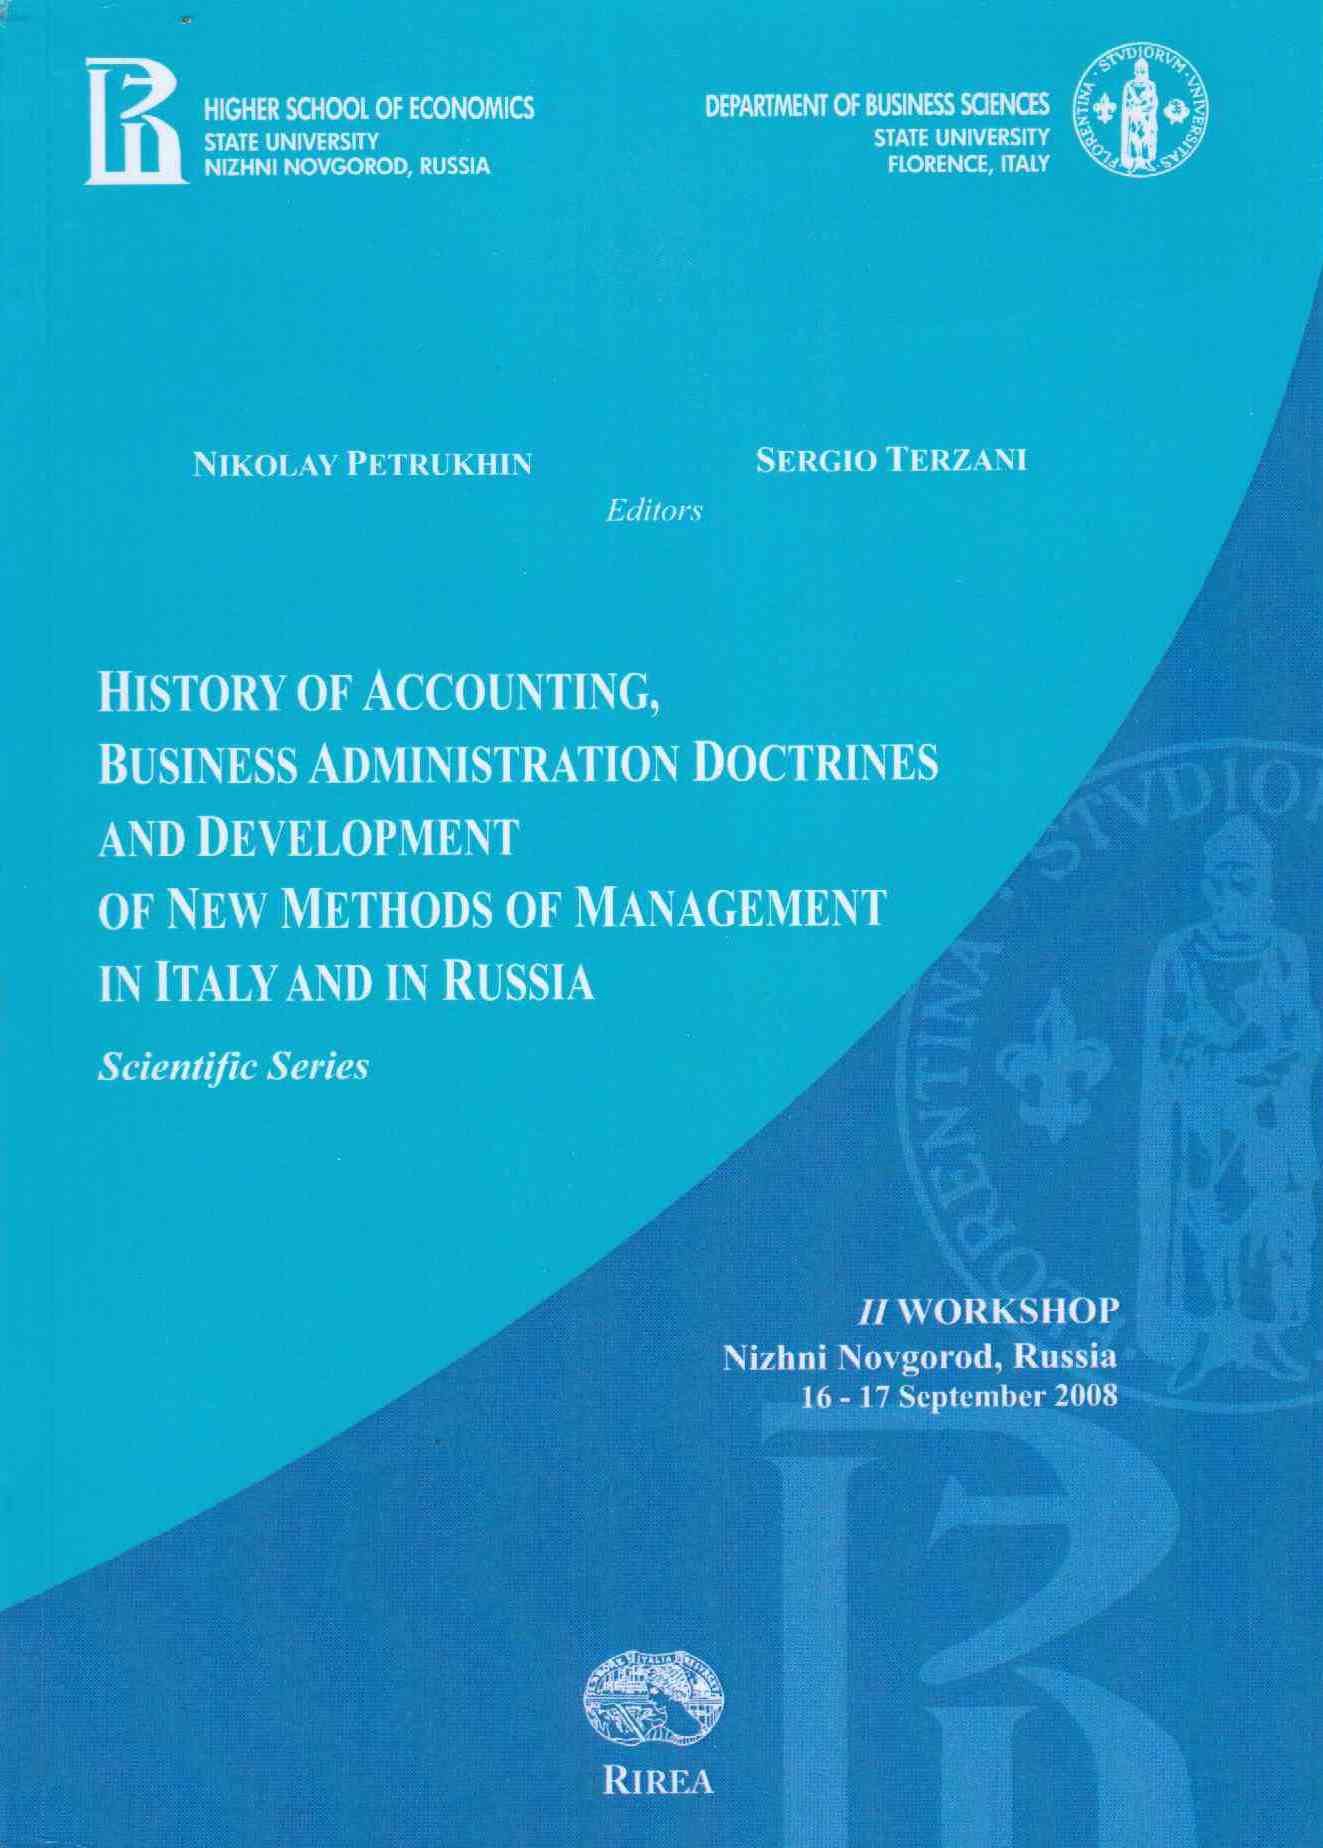 History of Accounting, Business Administration Doctrines and Development of New Methods of Management in Italy and in Russia. 16-17 September 2008, Nizhny Novgorod